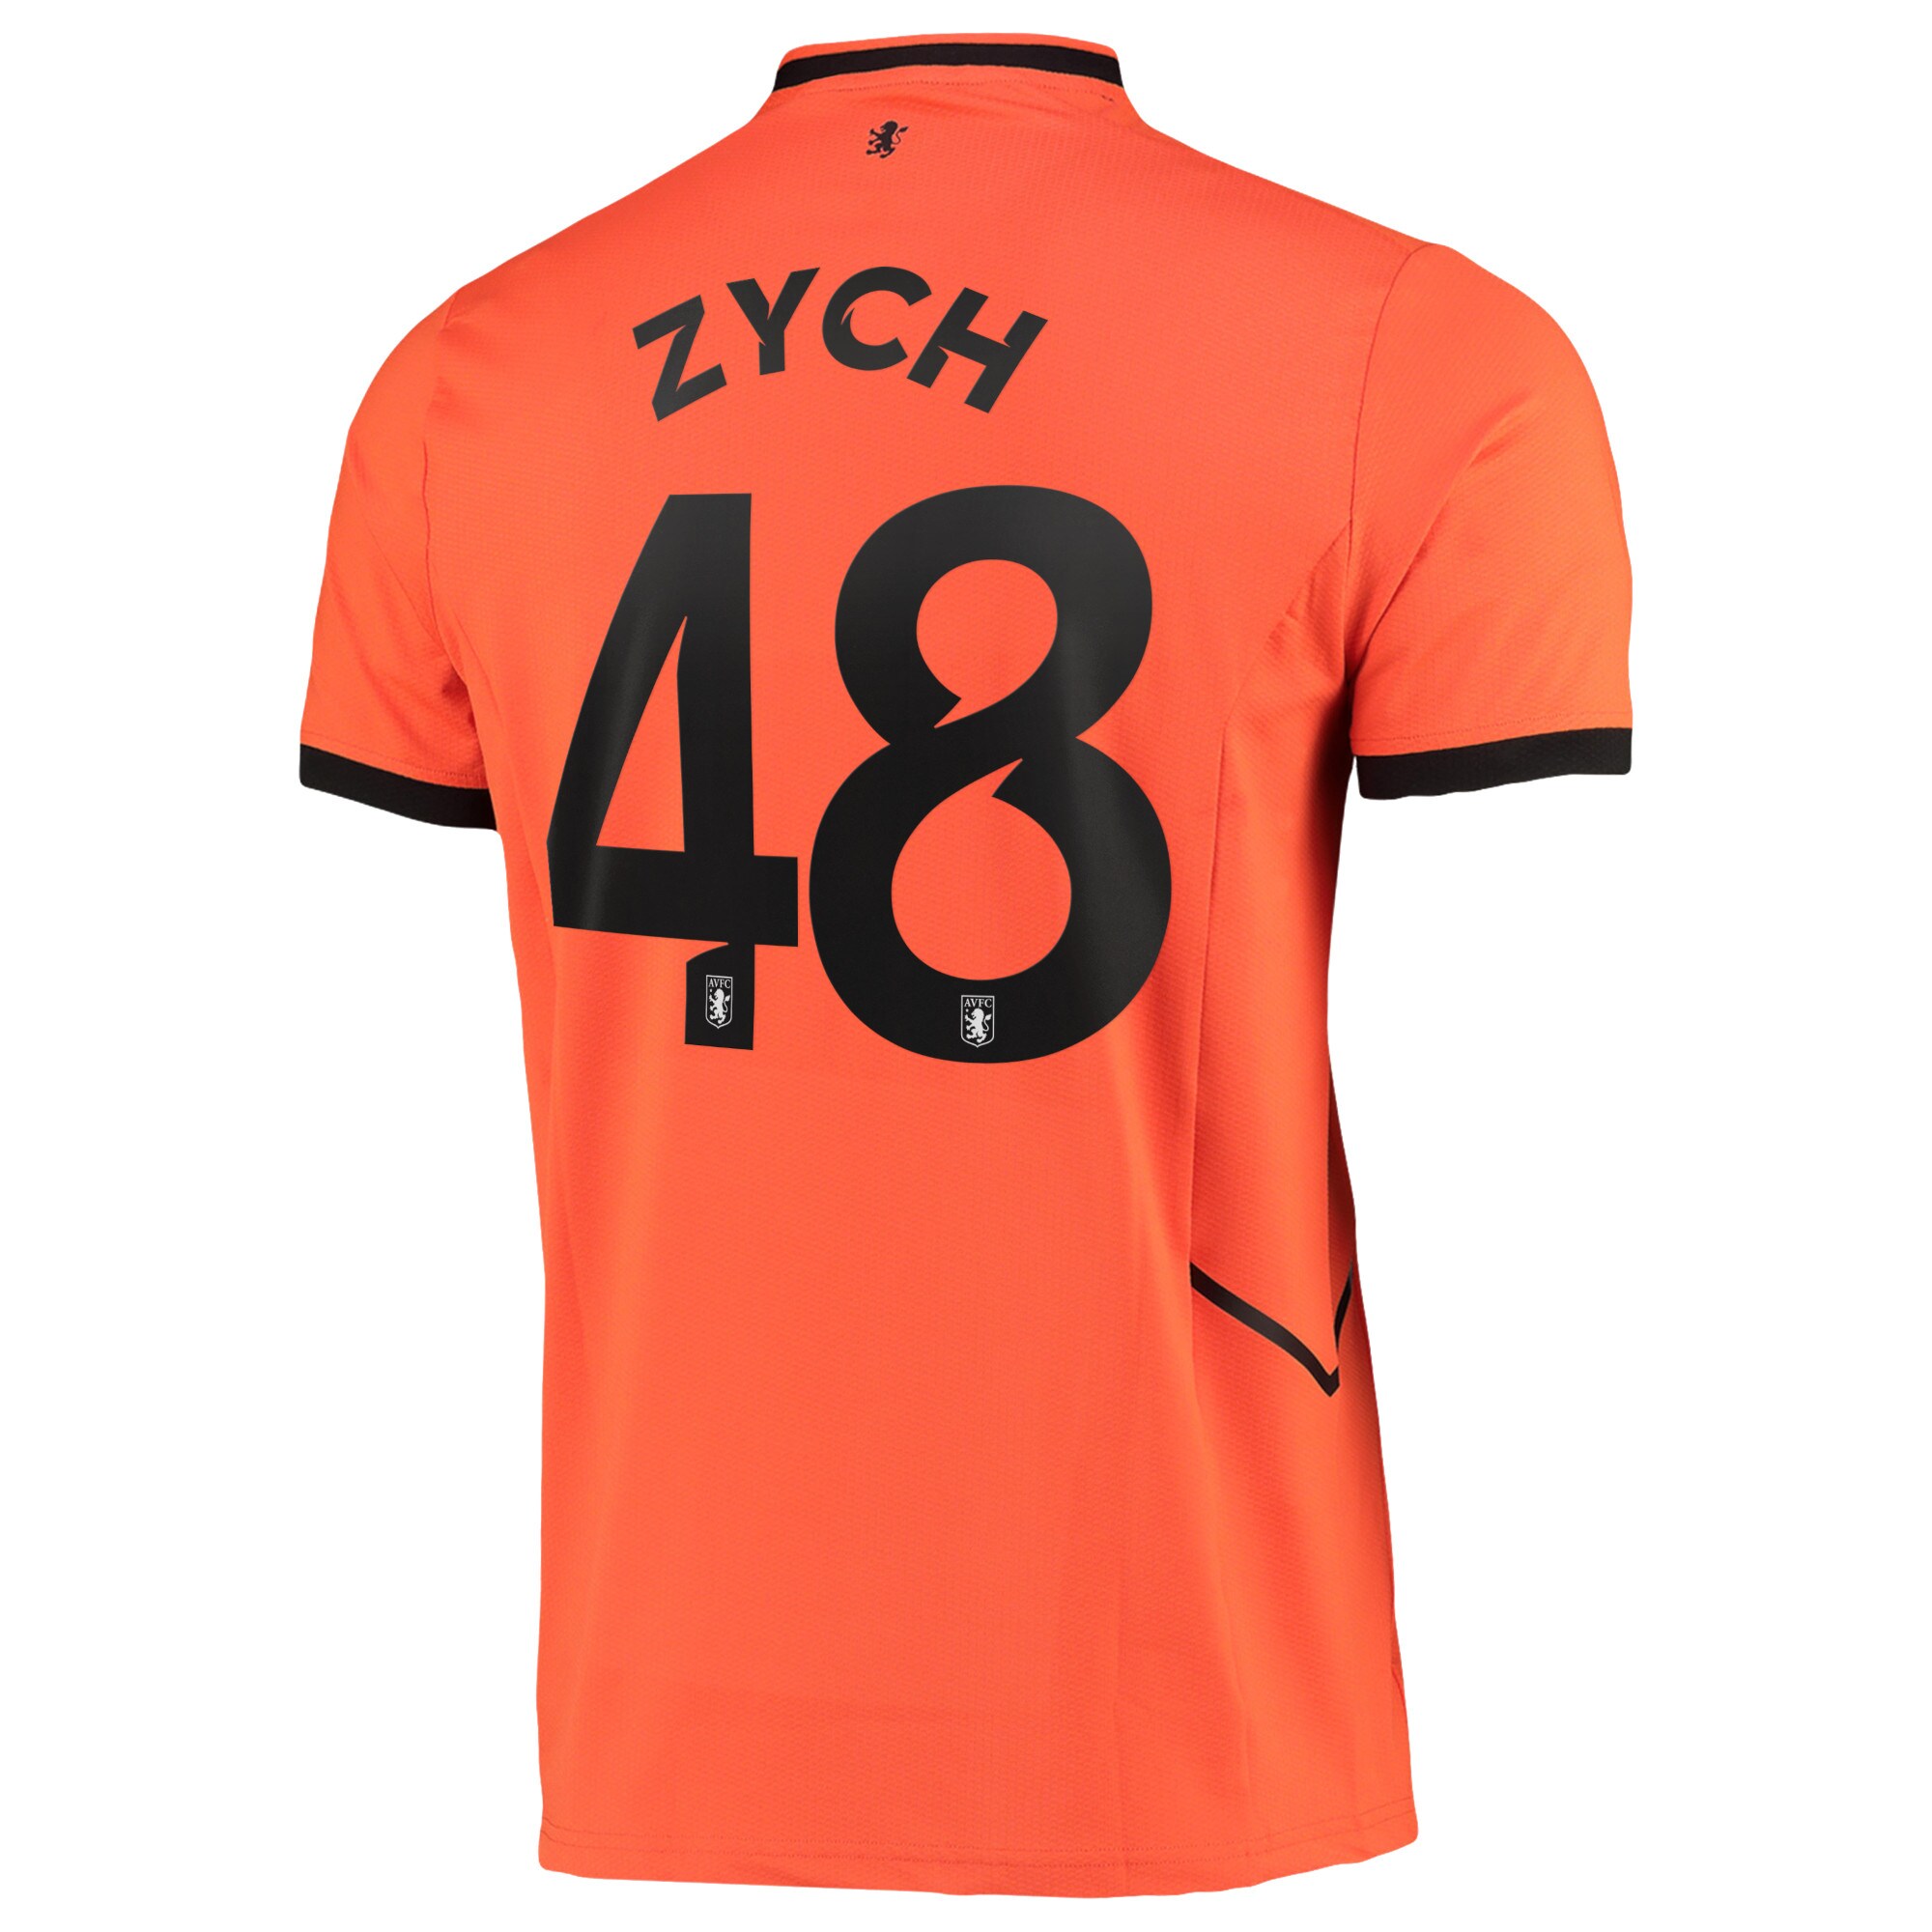 Aston Villa Cup Away Goalkeeper Shirt 2022-23 with Zych 48 printing